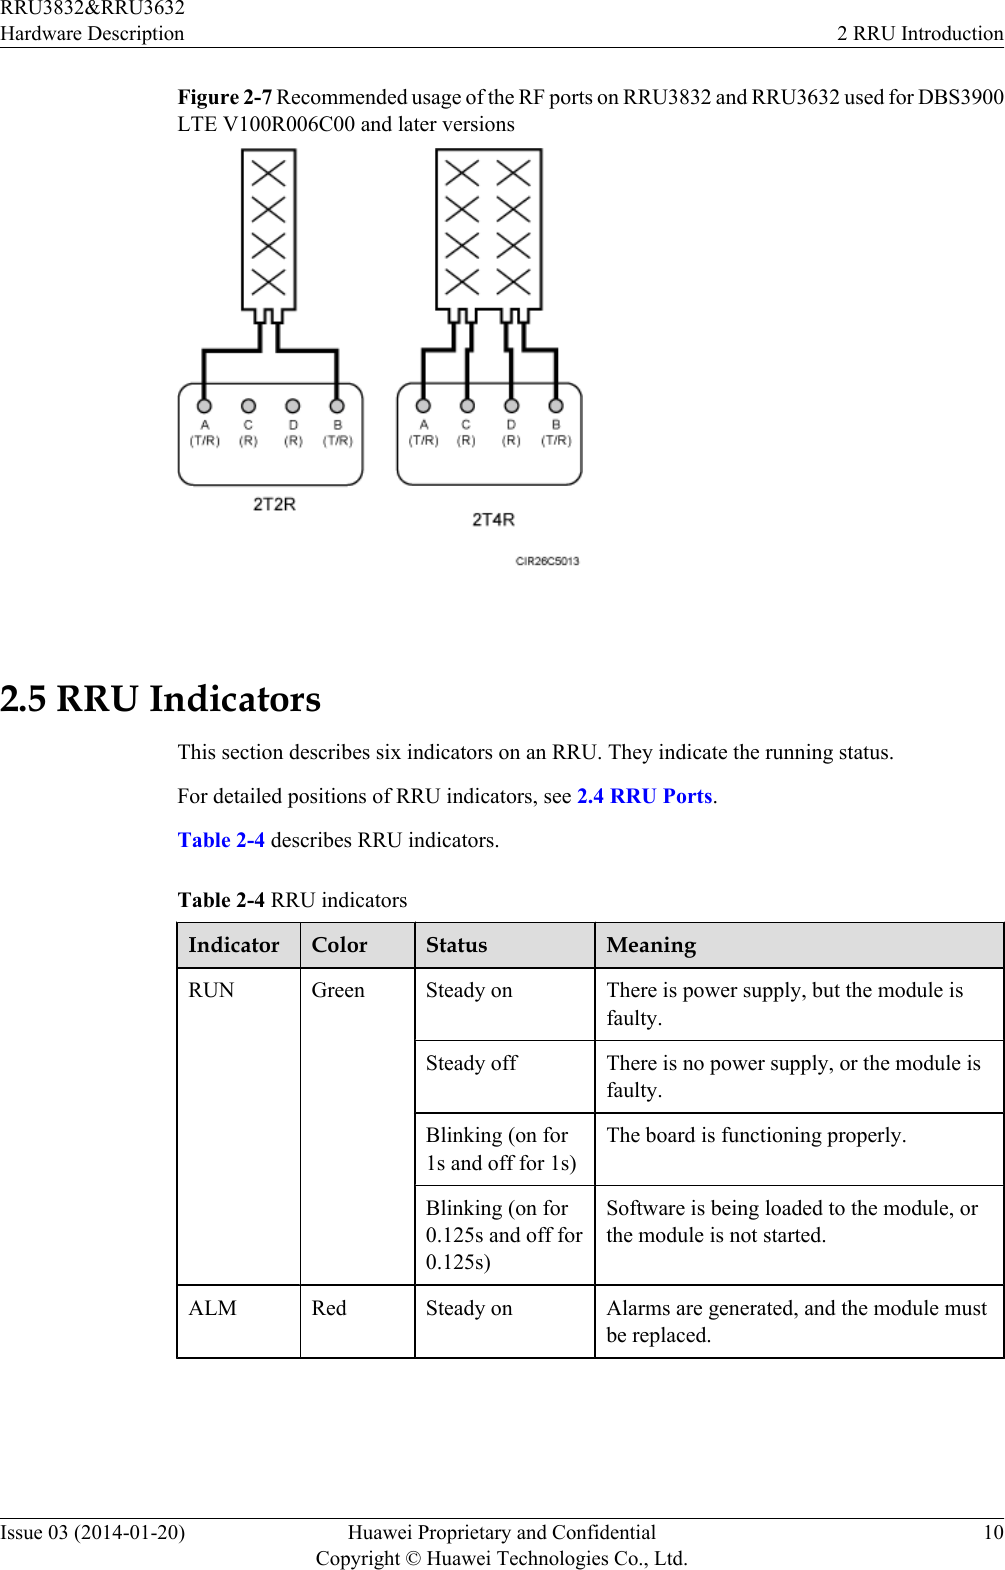 Figure 2-7 Recommended usage of the RF ports on RRU3832 and RRU3632 used for DBS3900LTE V100R006C00 and later versions 2.5 RRU IndicatorsThis section describes six indicators on an RRU. They indicate the running status.For detailed positions of RRU indicators, see 2.4 RRU Ports.Table 2-4 describes RRU indicators.Table 2-4 RRU indicatorsIndicator Color Status MeaningRUN Green Steady on There is power supply, but the module isfaulty.Steady off There is no power supply, or the module isfaulty.Blinking (on for1s and off for 1s)The board is functioning properly.Blinking (on for0.125s and off for0.125s)Software is being loaded to the module, orthe module is not started.ALM Red Steady on Alarms are generated, and the module mustbe replaced.RRU3832&amp;RRU3632Hardware Description 2 RRU IntroductionIssue 03 (2014-01-20) Huawei Proprietary and ConfidentialCopyright © Huawei Technologies Co., Ltd.10